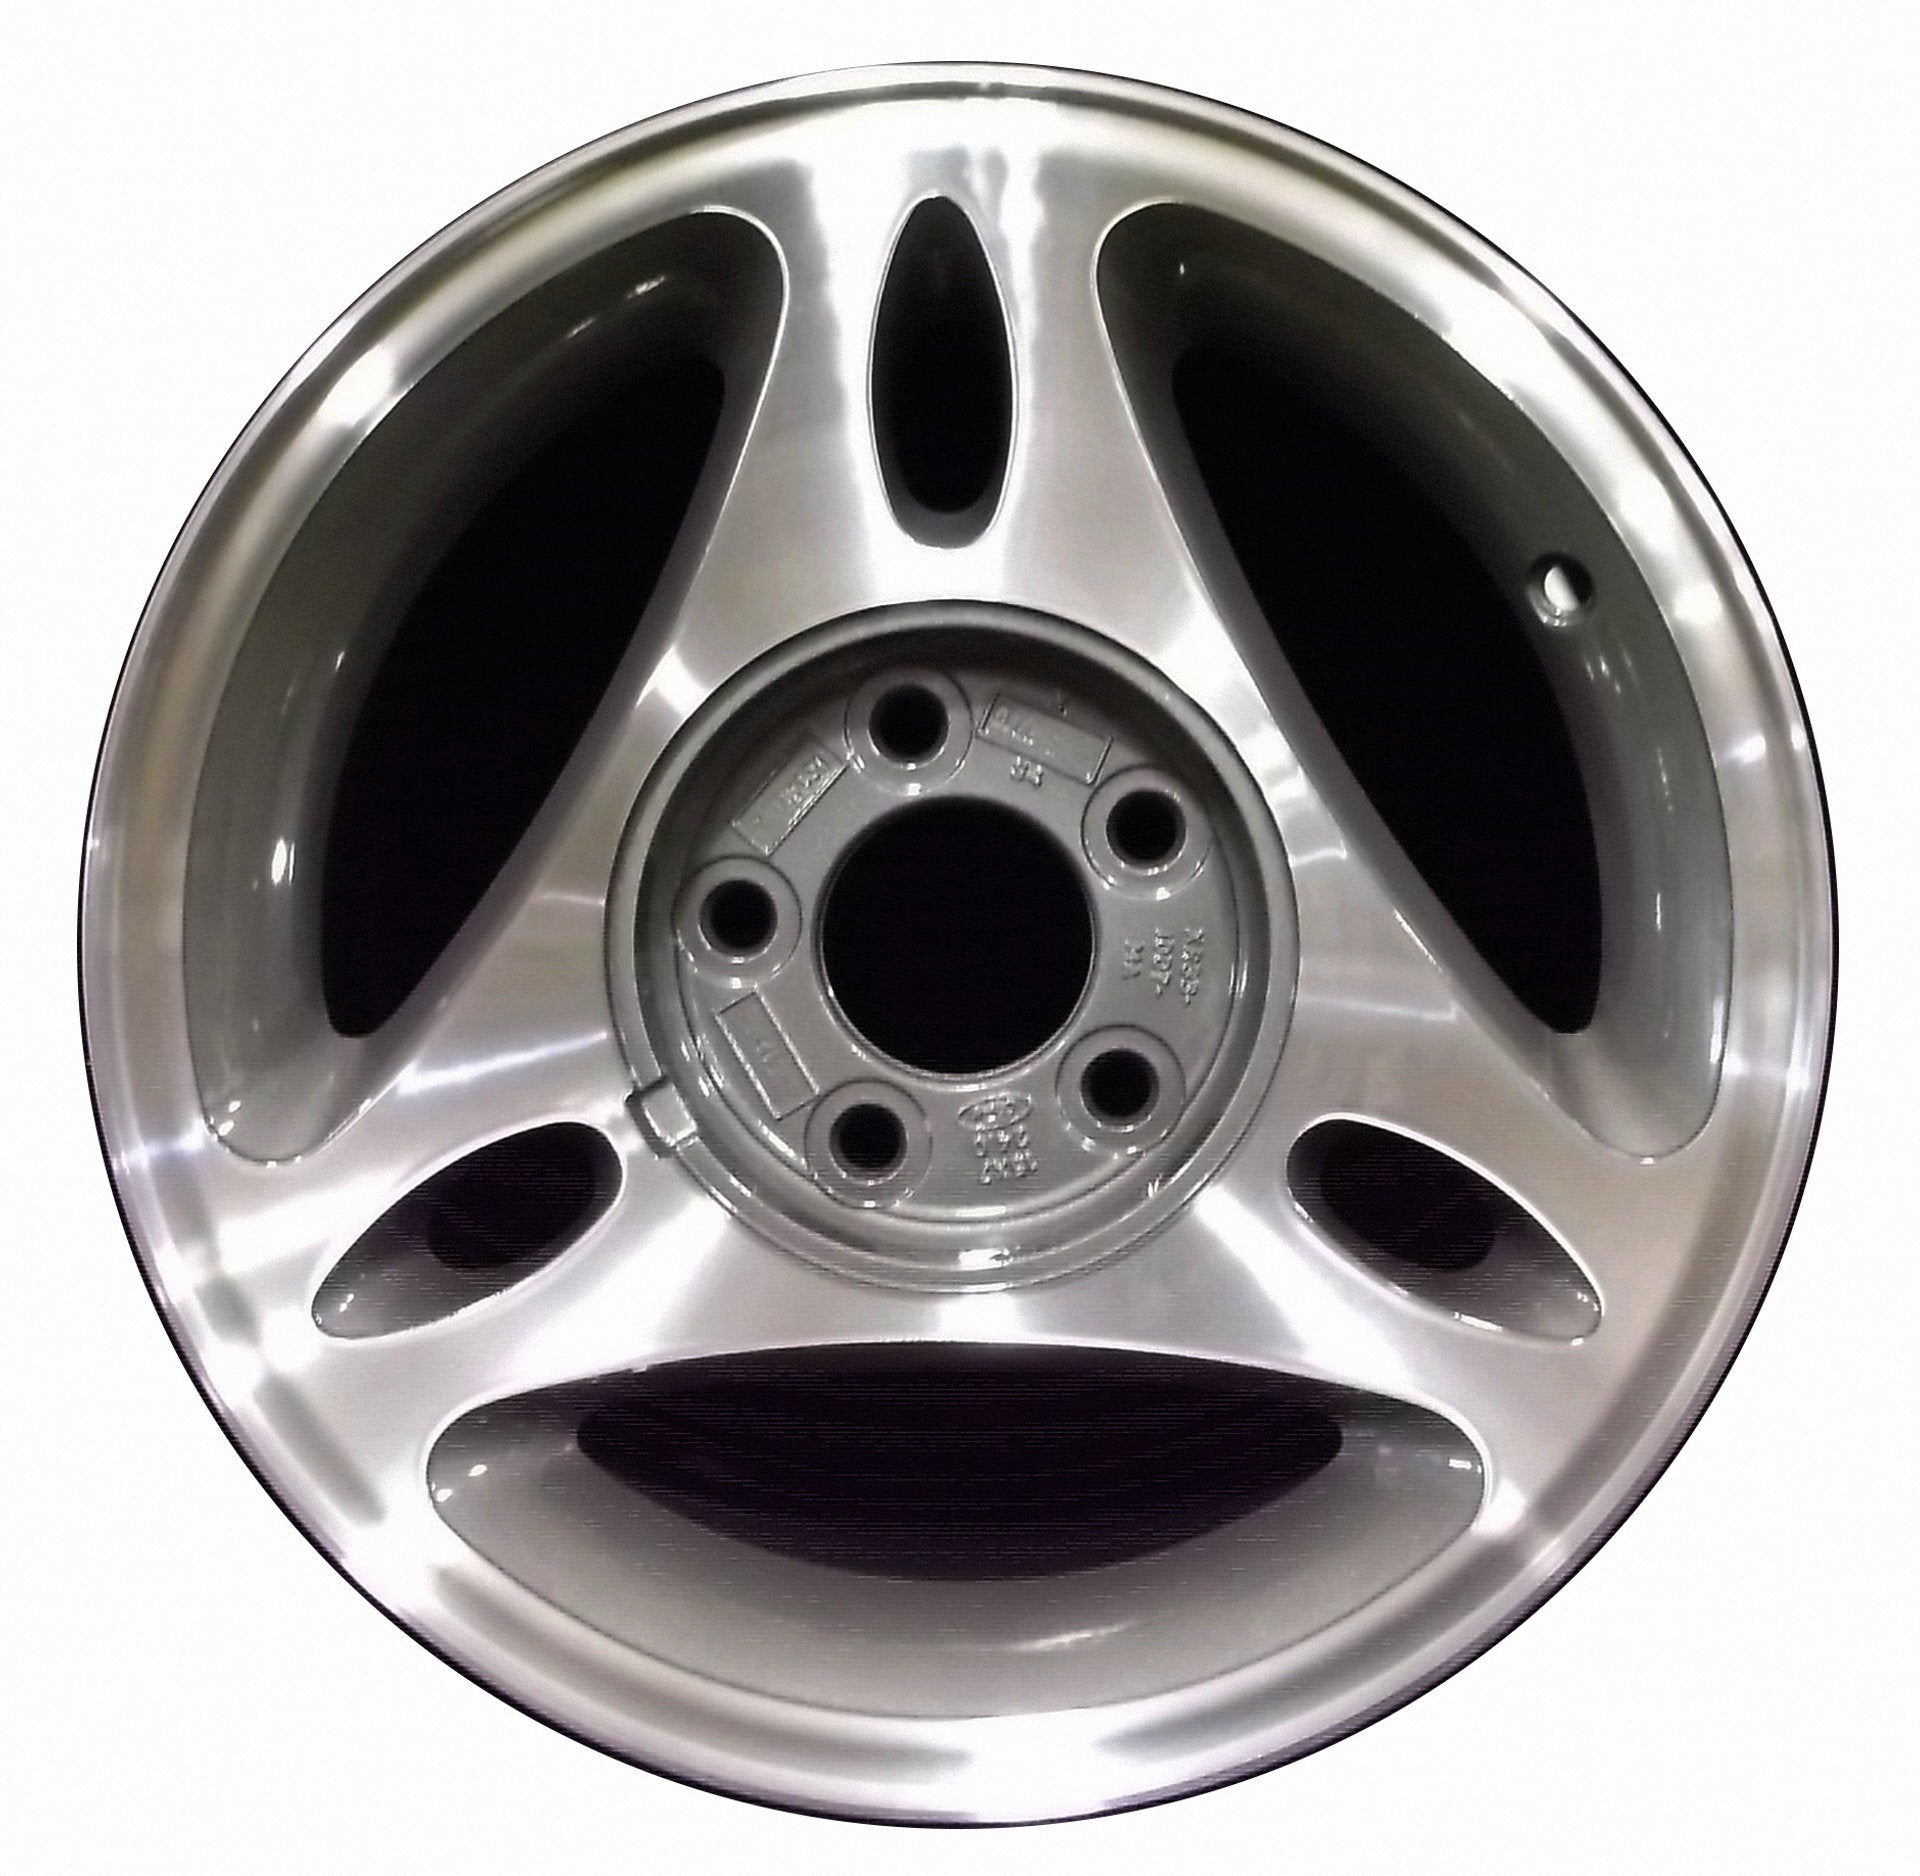 Ford Mustang  1996, 1997, 1998, 1999, 2000 Factory OEM Car Wheel Size 15x7 Alloy WAO.3172A.PC03.MA